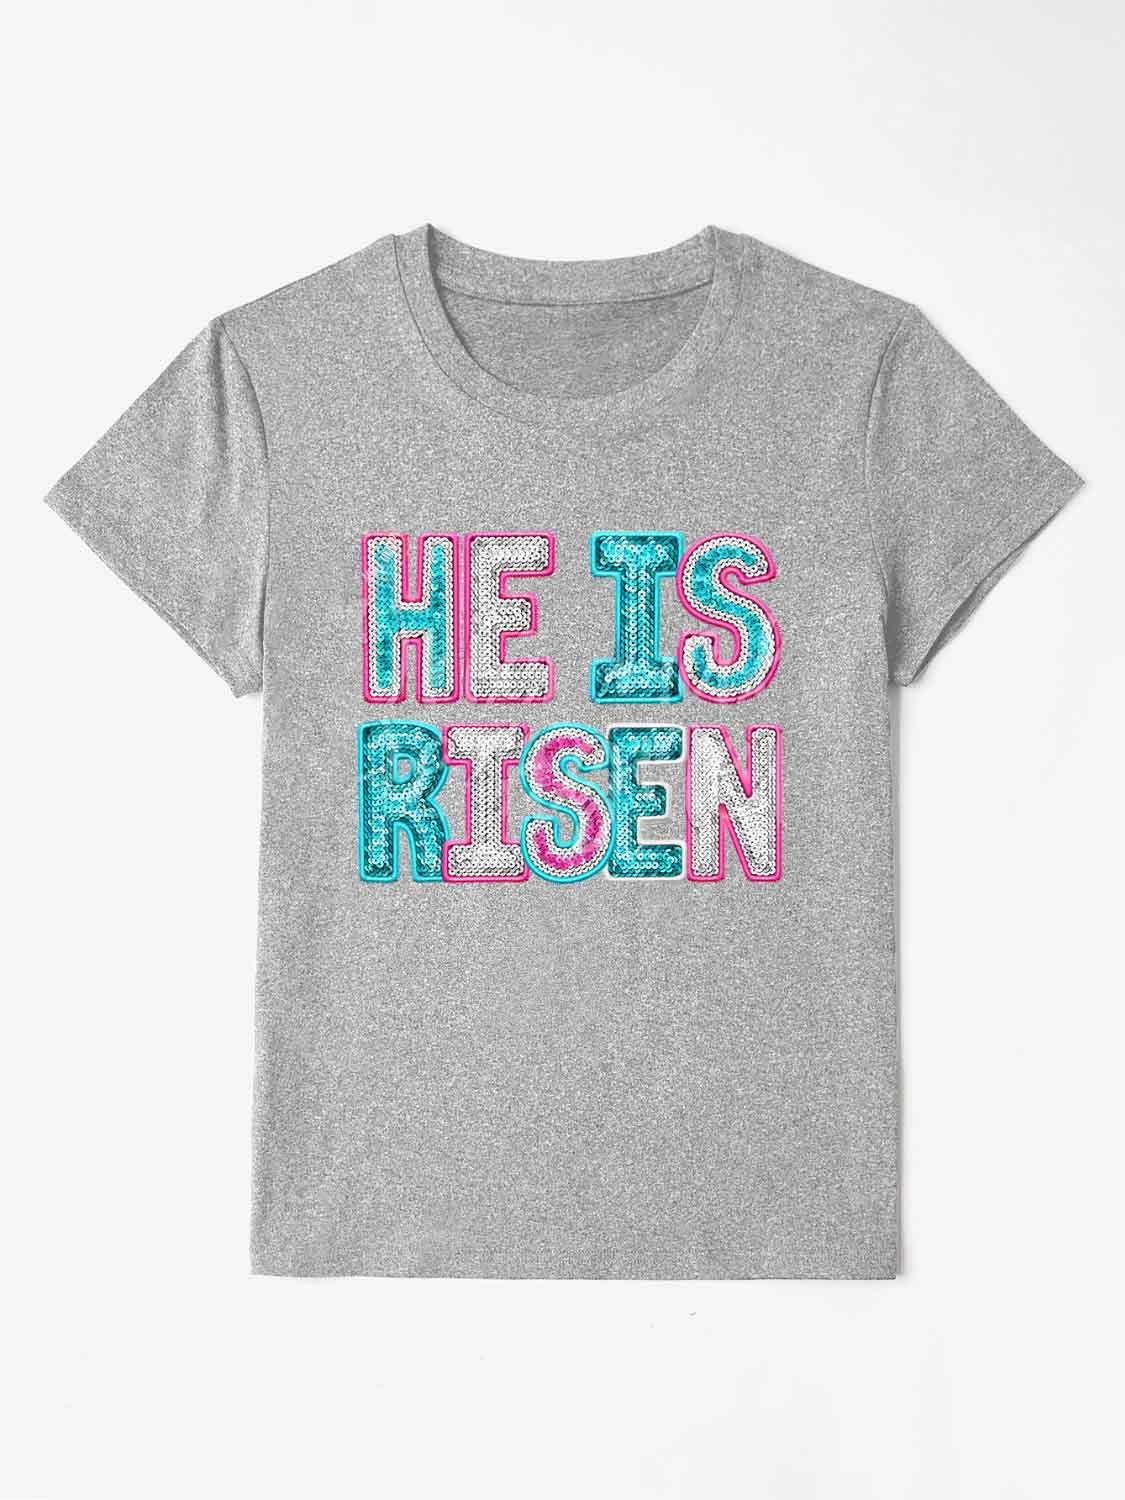 HE IS RISEN Sequin Round Neck T-Shirt - Anchored Feather Boutique